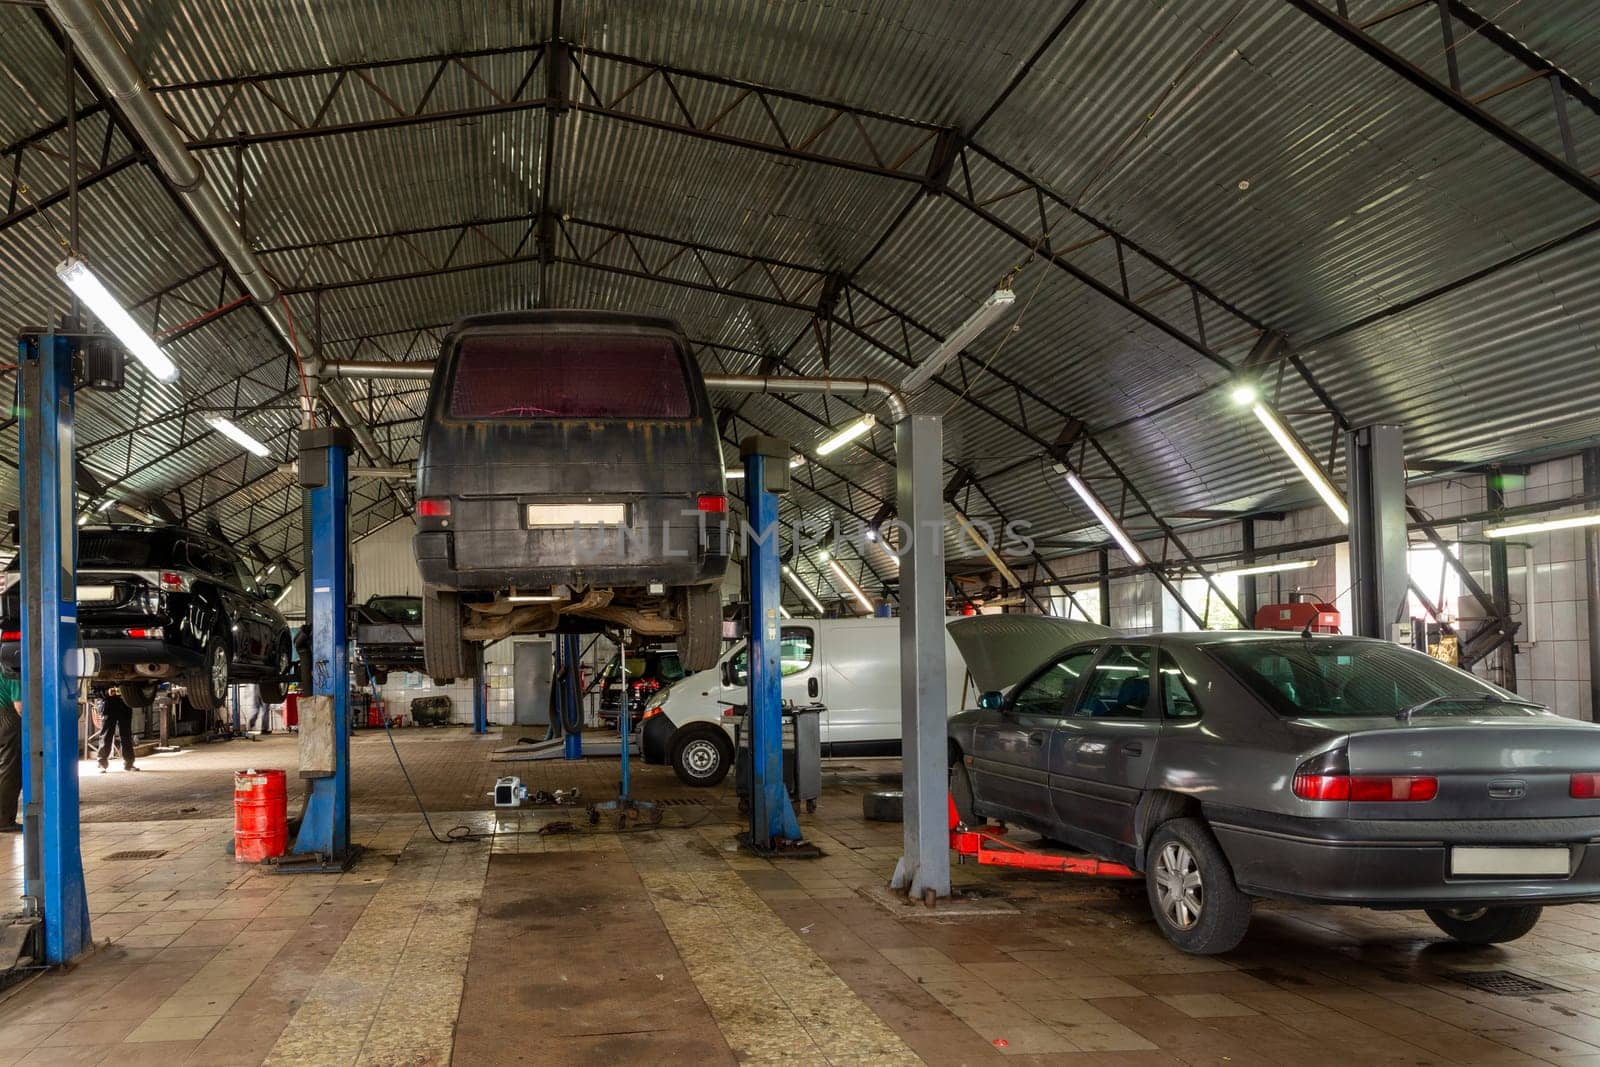 Cars in automobile repair service center. Modern car repair station with a large number of lifts and specialized equipment for diagnostics and service repair car